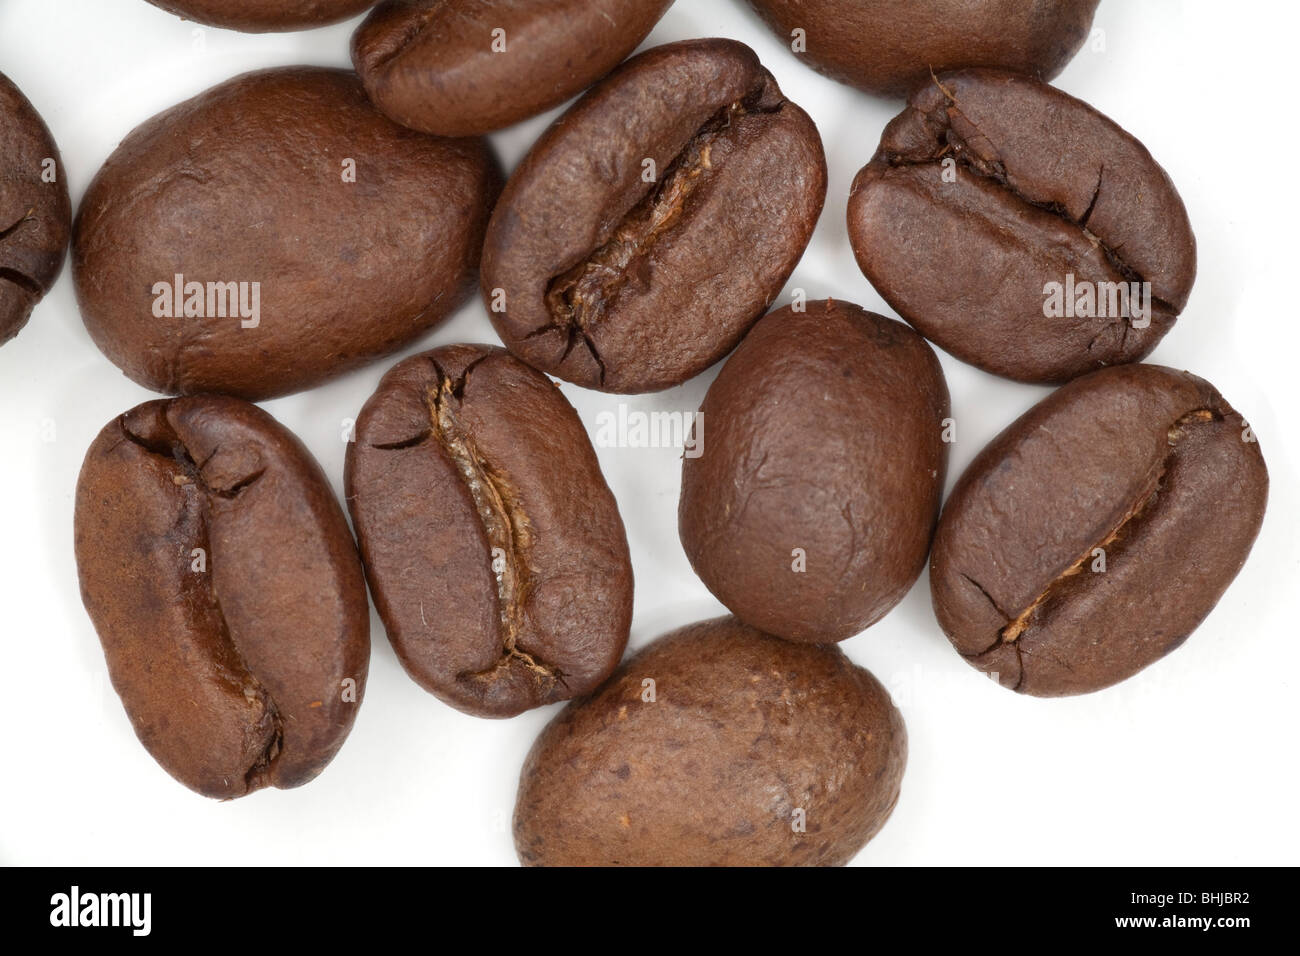 Roasted coffee beans close up Stock Photo